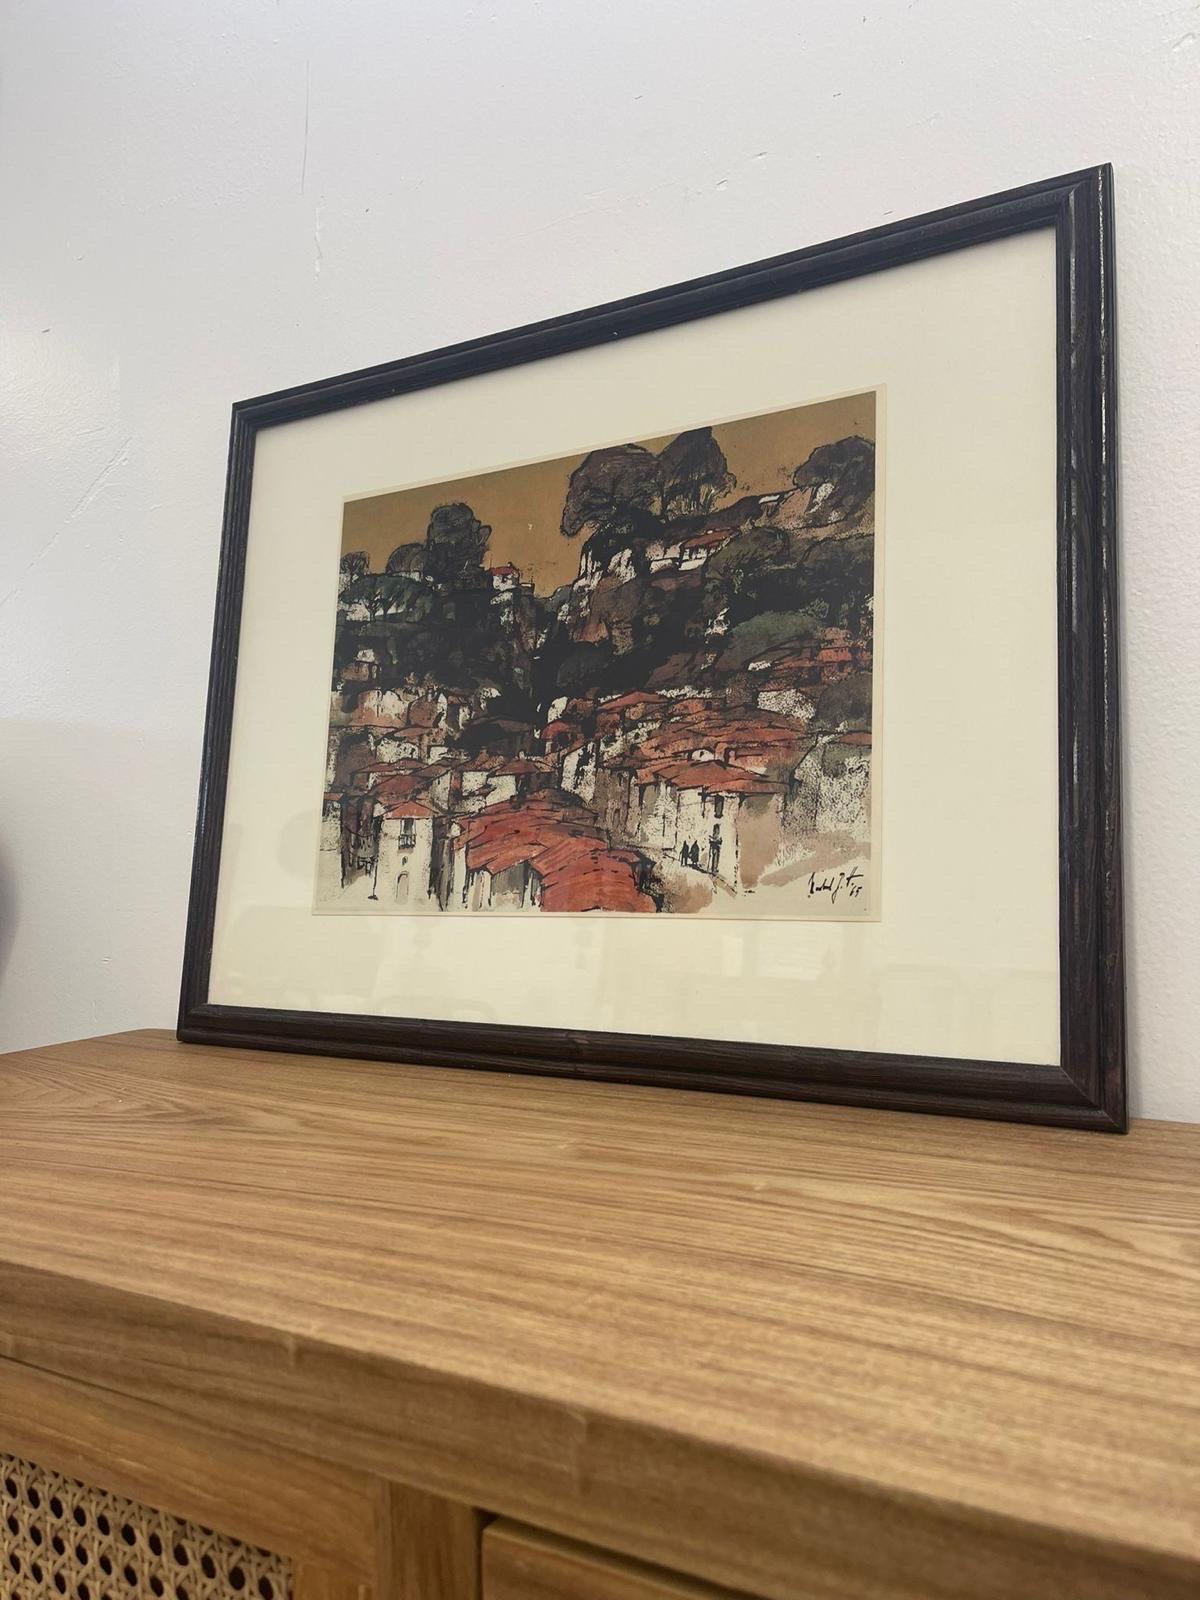 Vintage Framed and Signed Art Print “Mountain Village in Portugal” by Hartmann In Good Condition For Sale In Seattle, WA